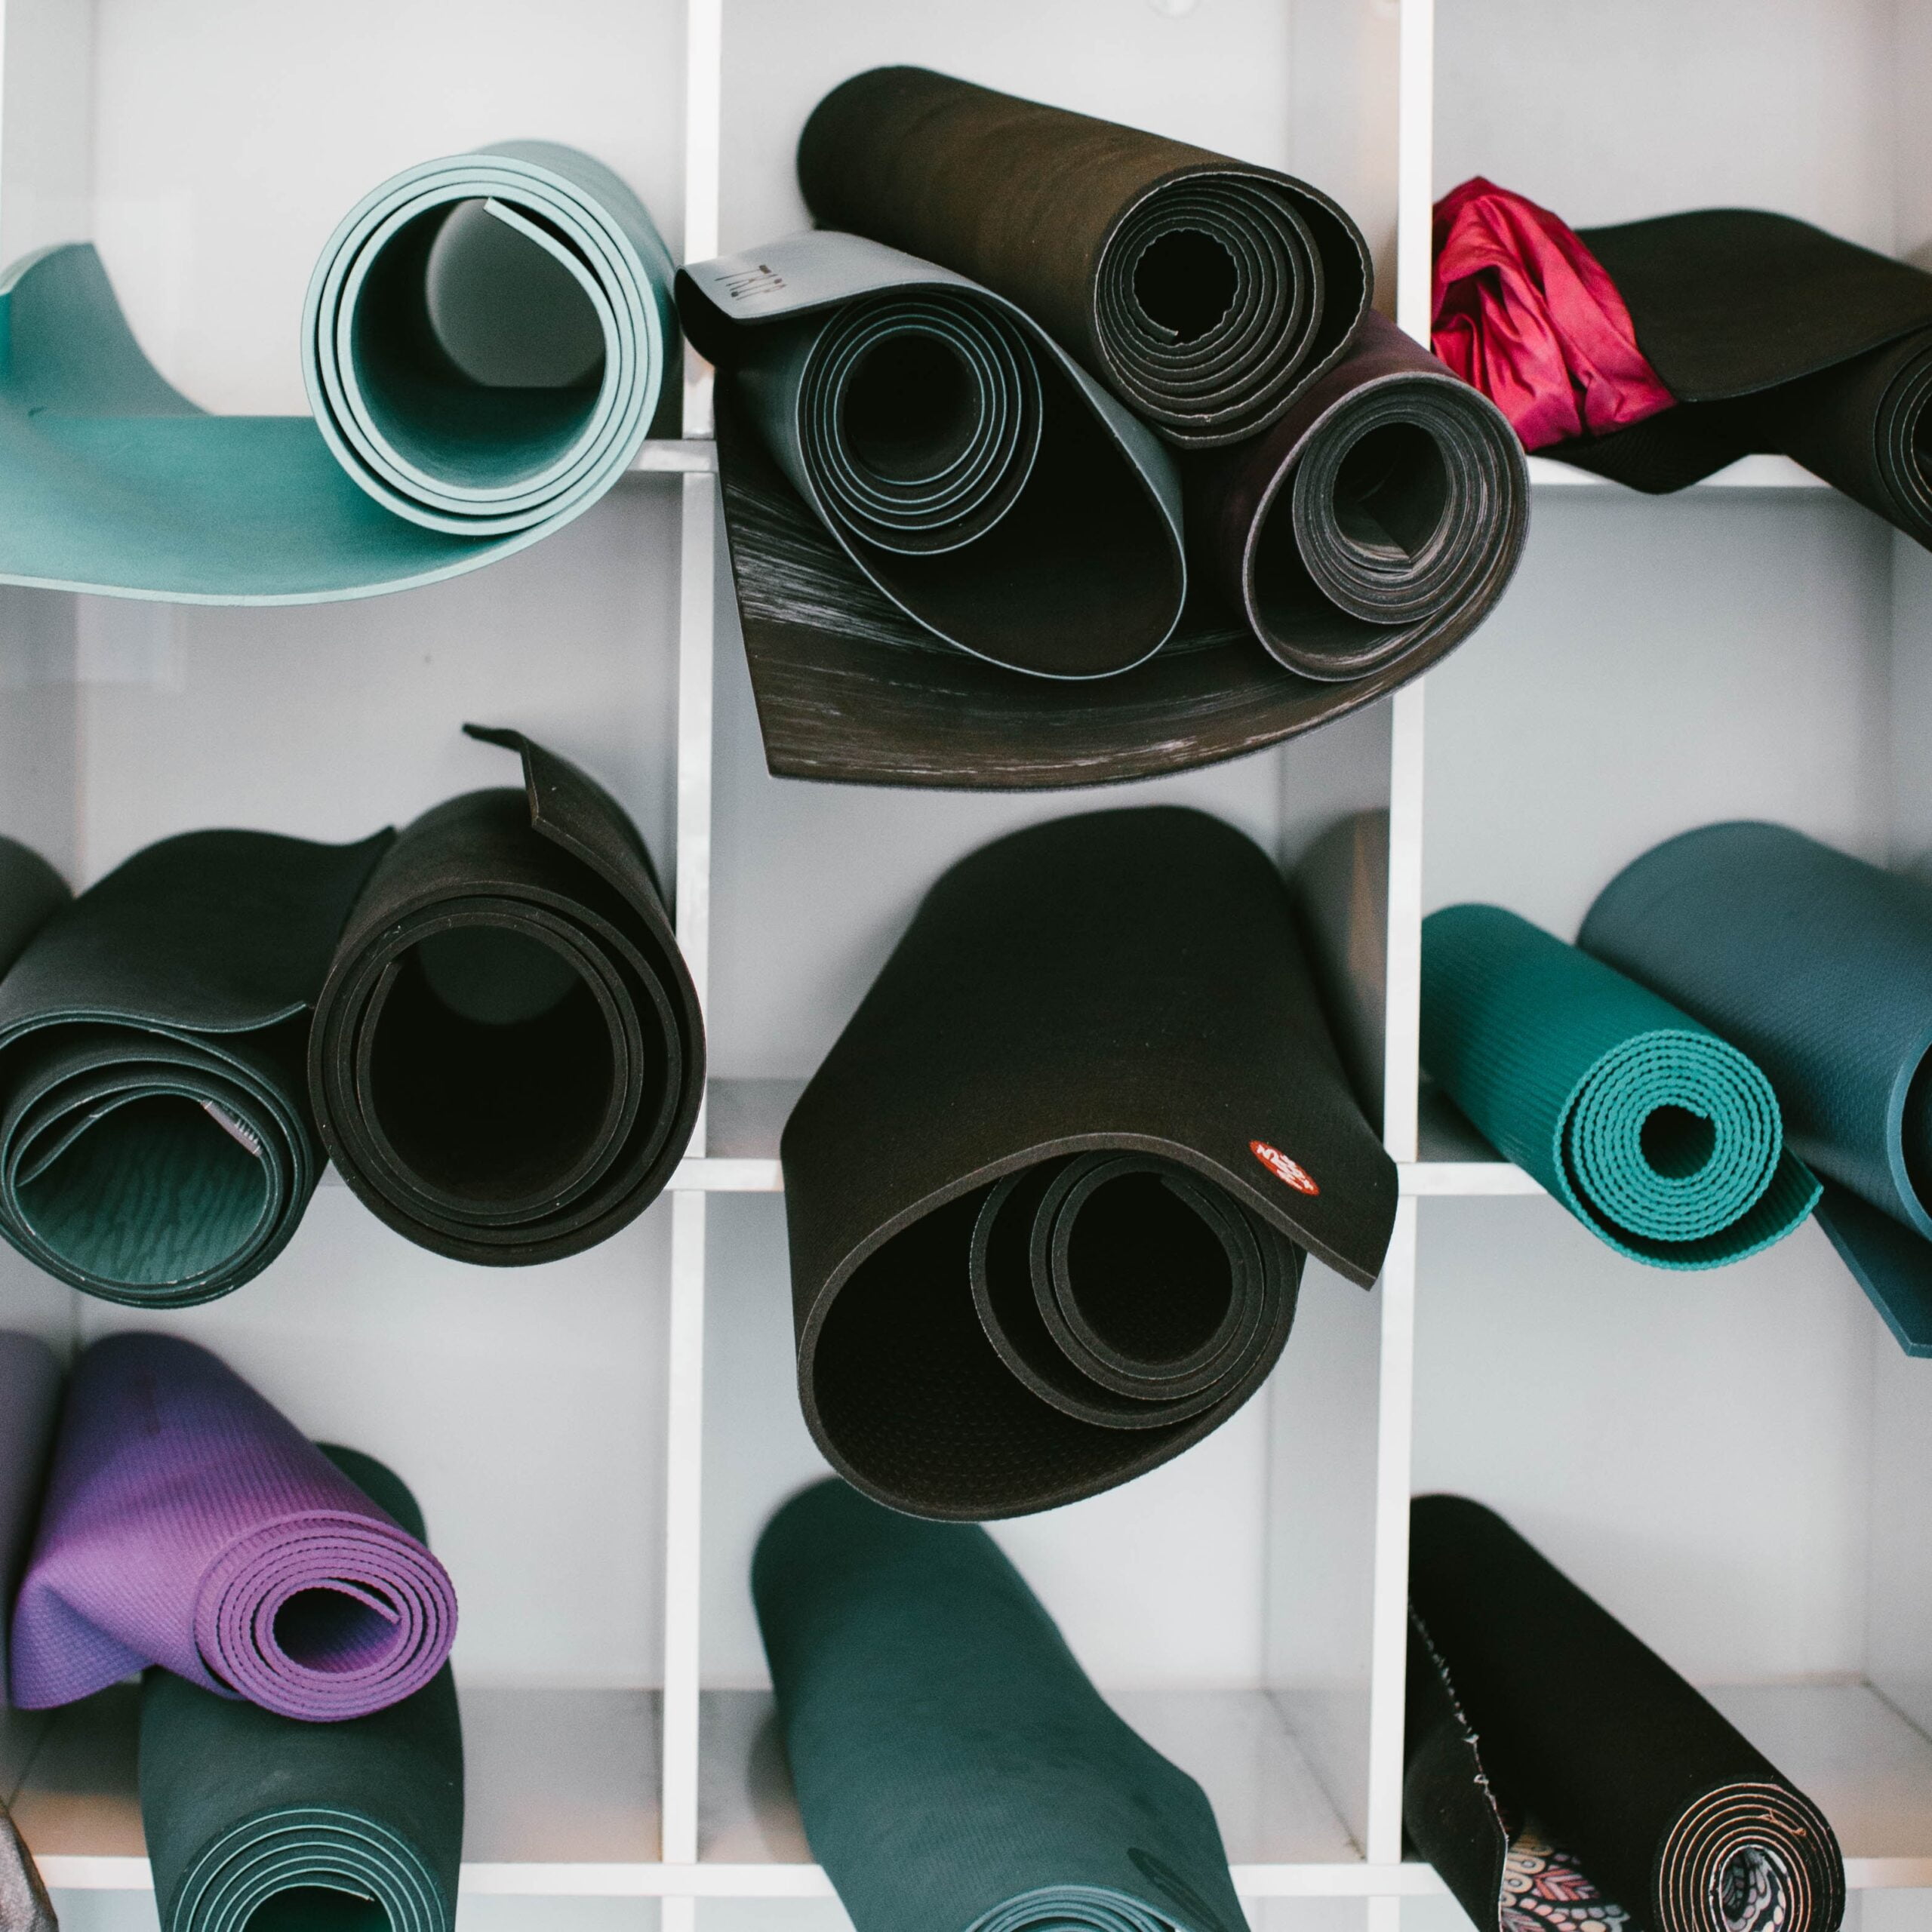 You are currently viewing Yoga Mats: A Look at PVC and Azodicarbonamide